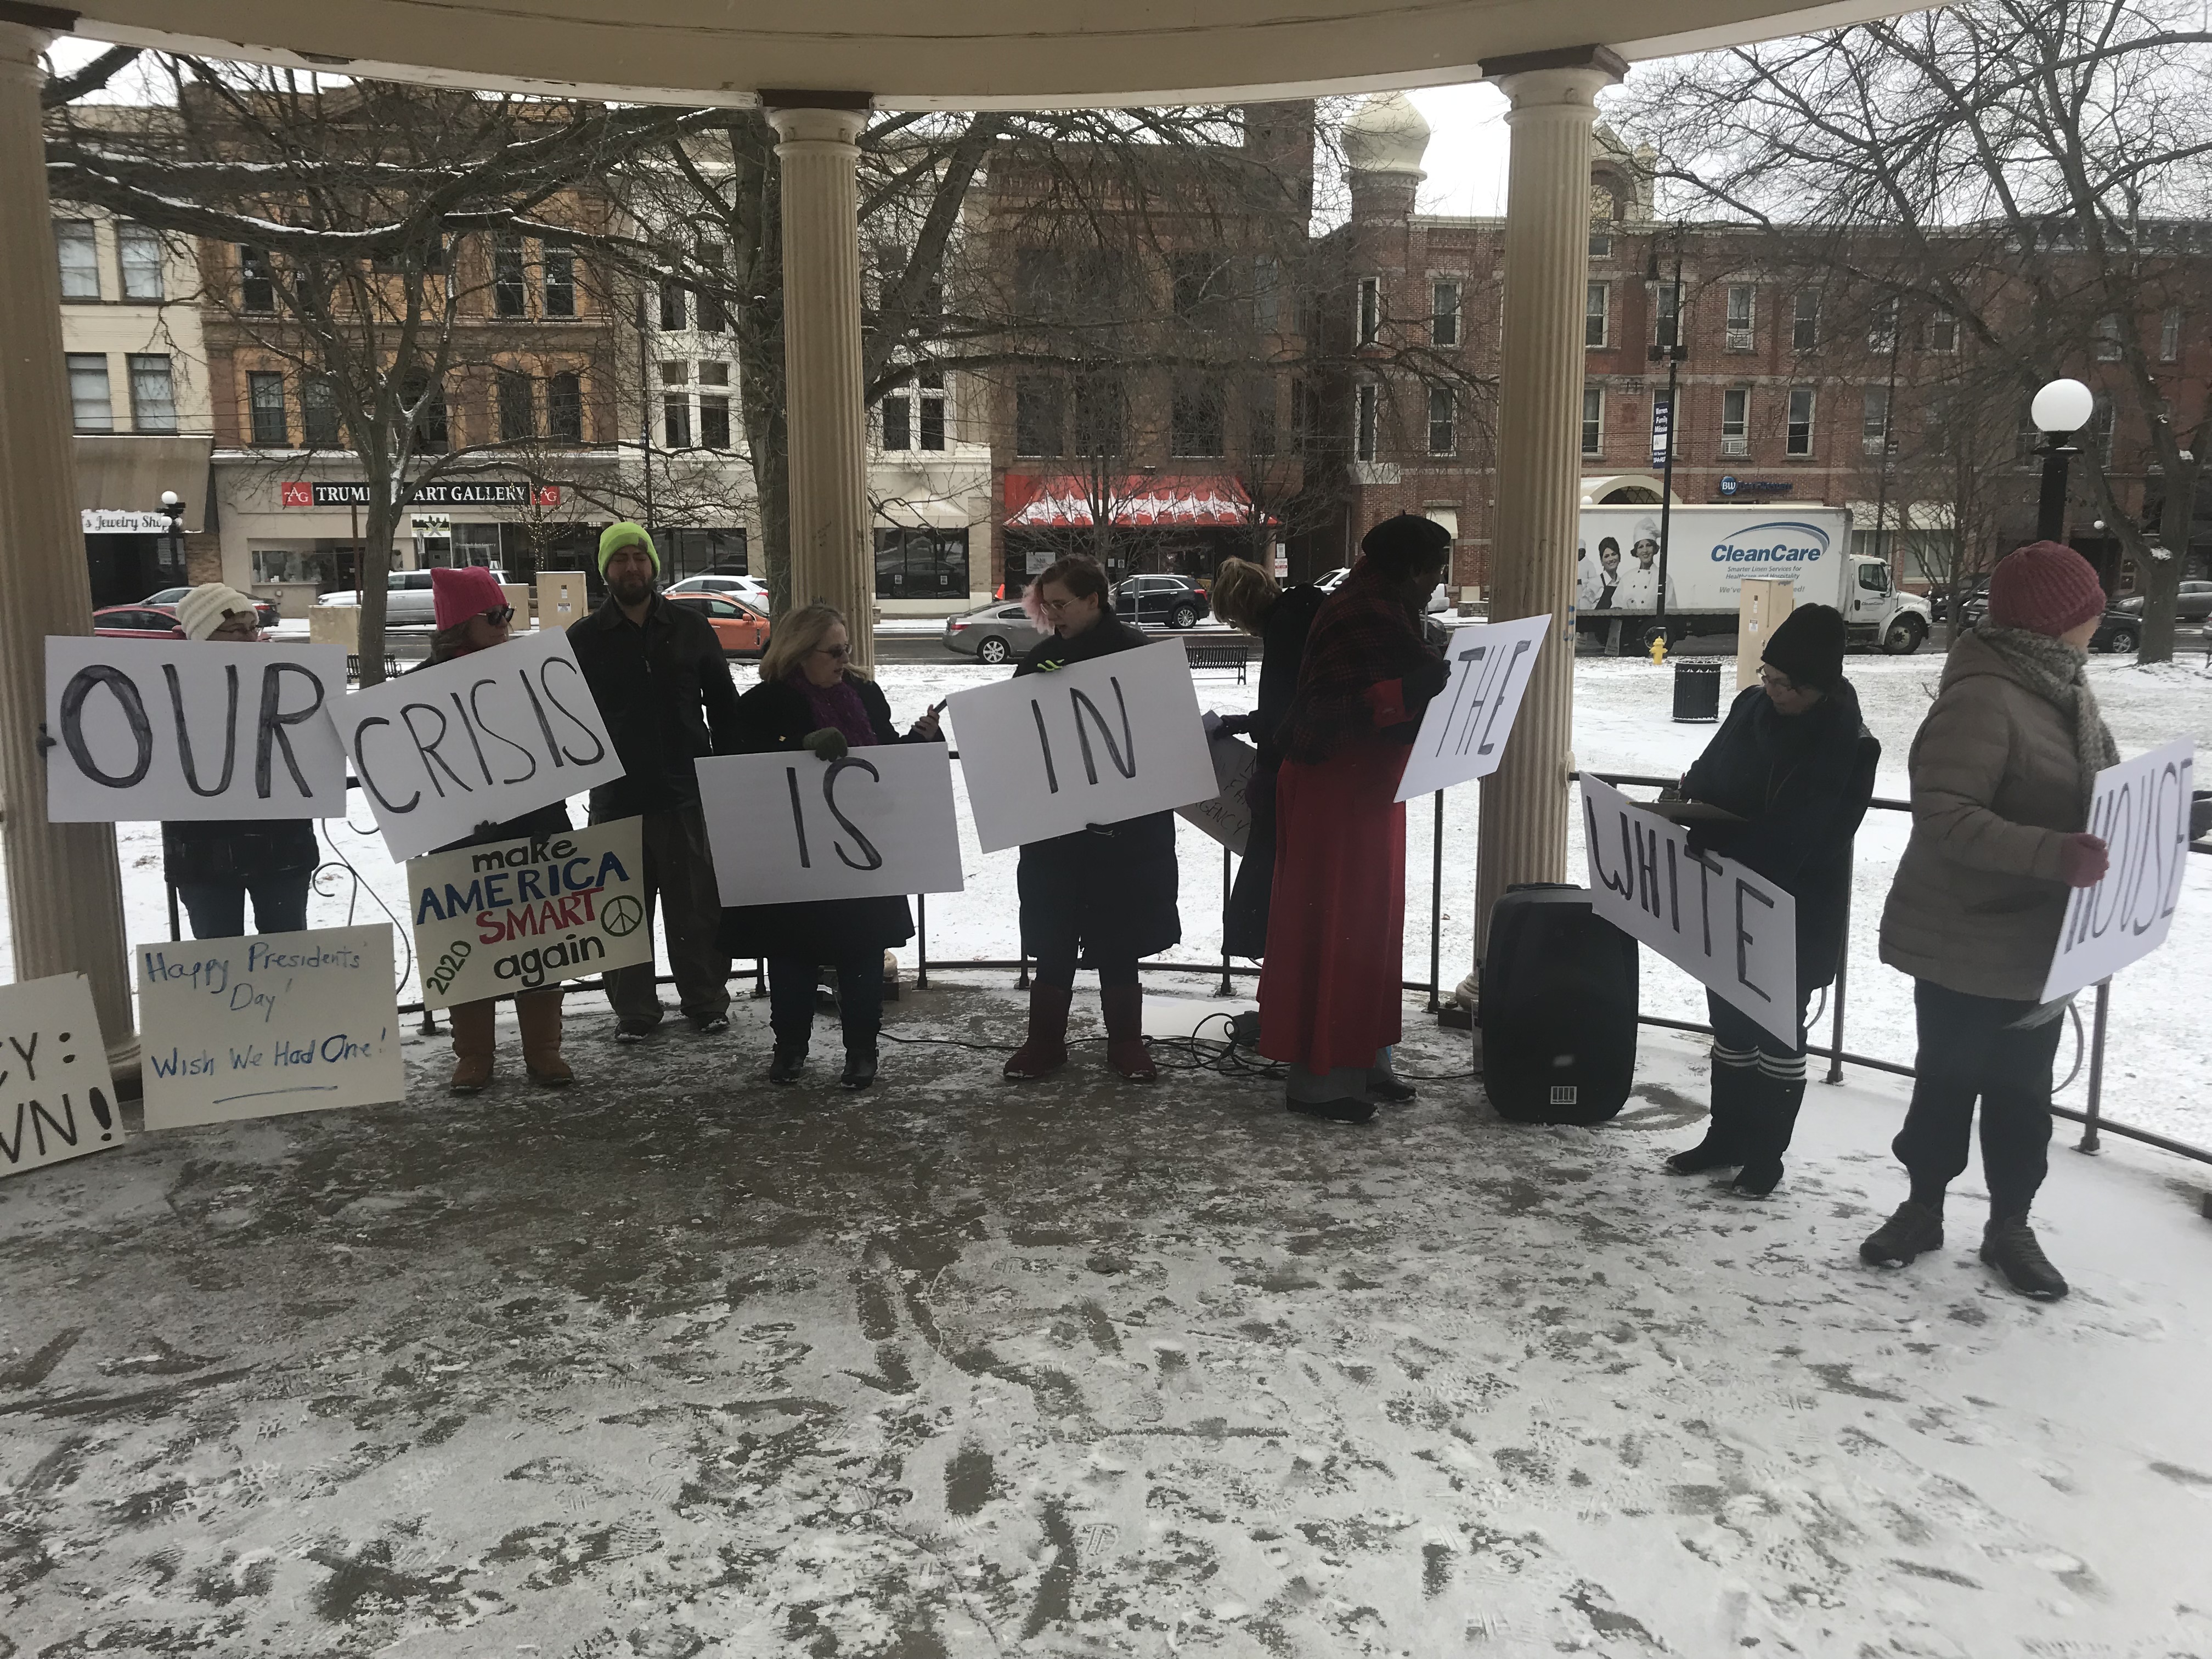 About 20 people assembled on the gazebo and Courthouse Square to protest President Trump‘s declaration of a national emergency to build a border wall. 